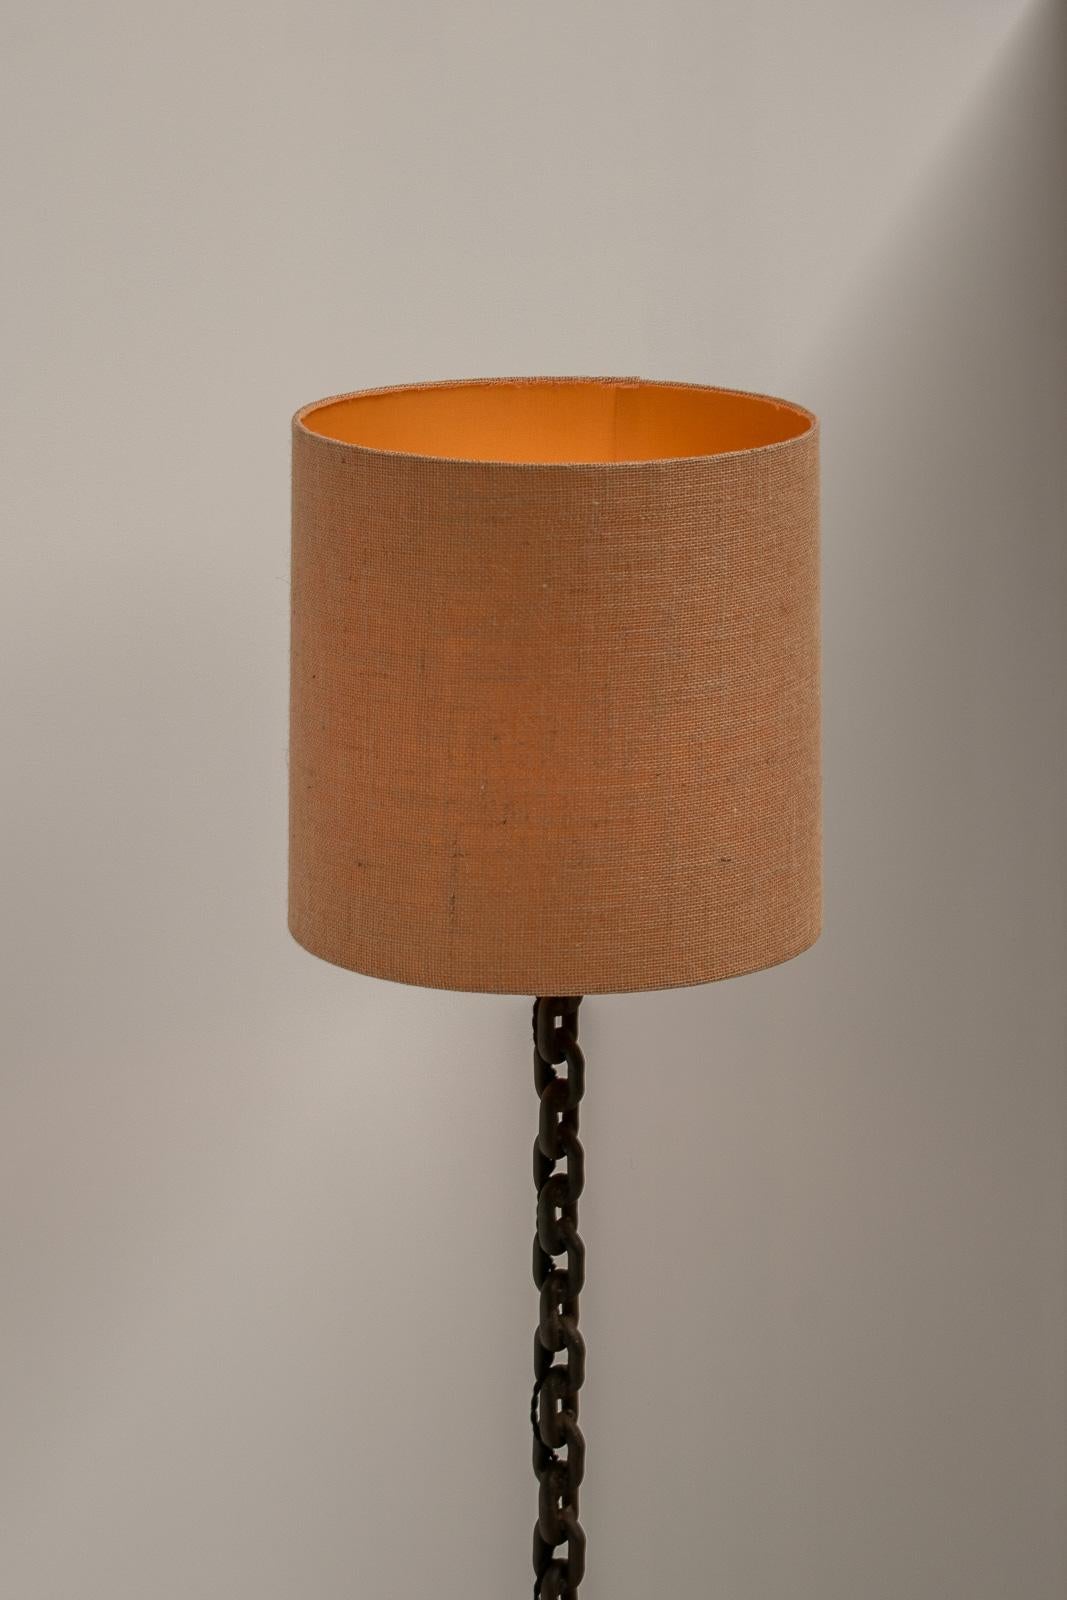 Metal Large Chain Link Floor Lamp in the style of Franz West, France, 1970s